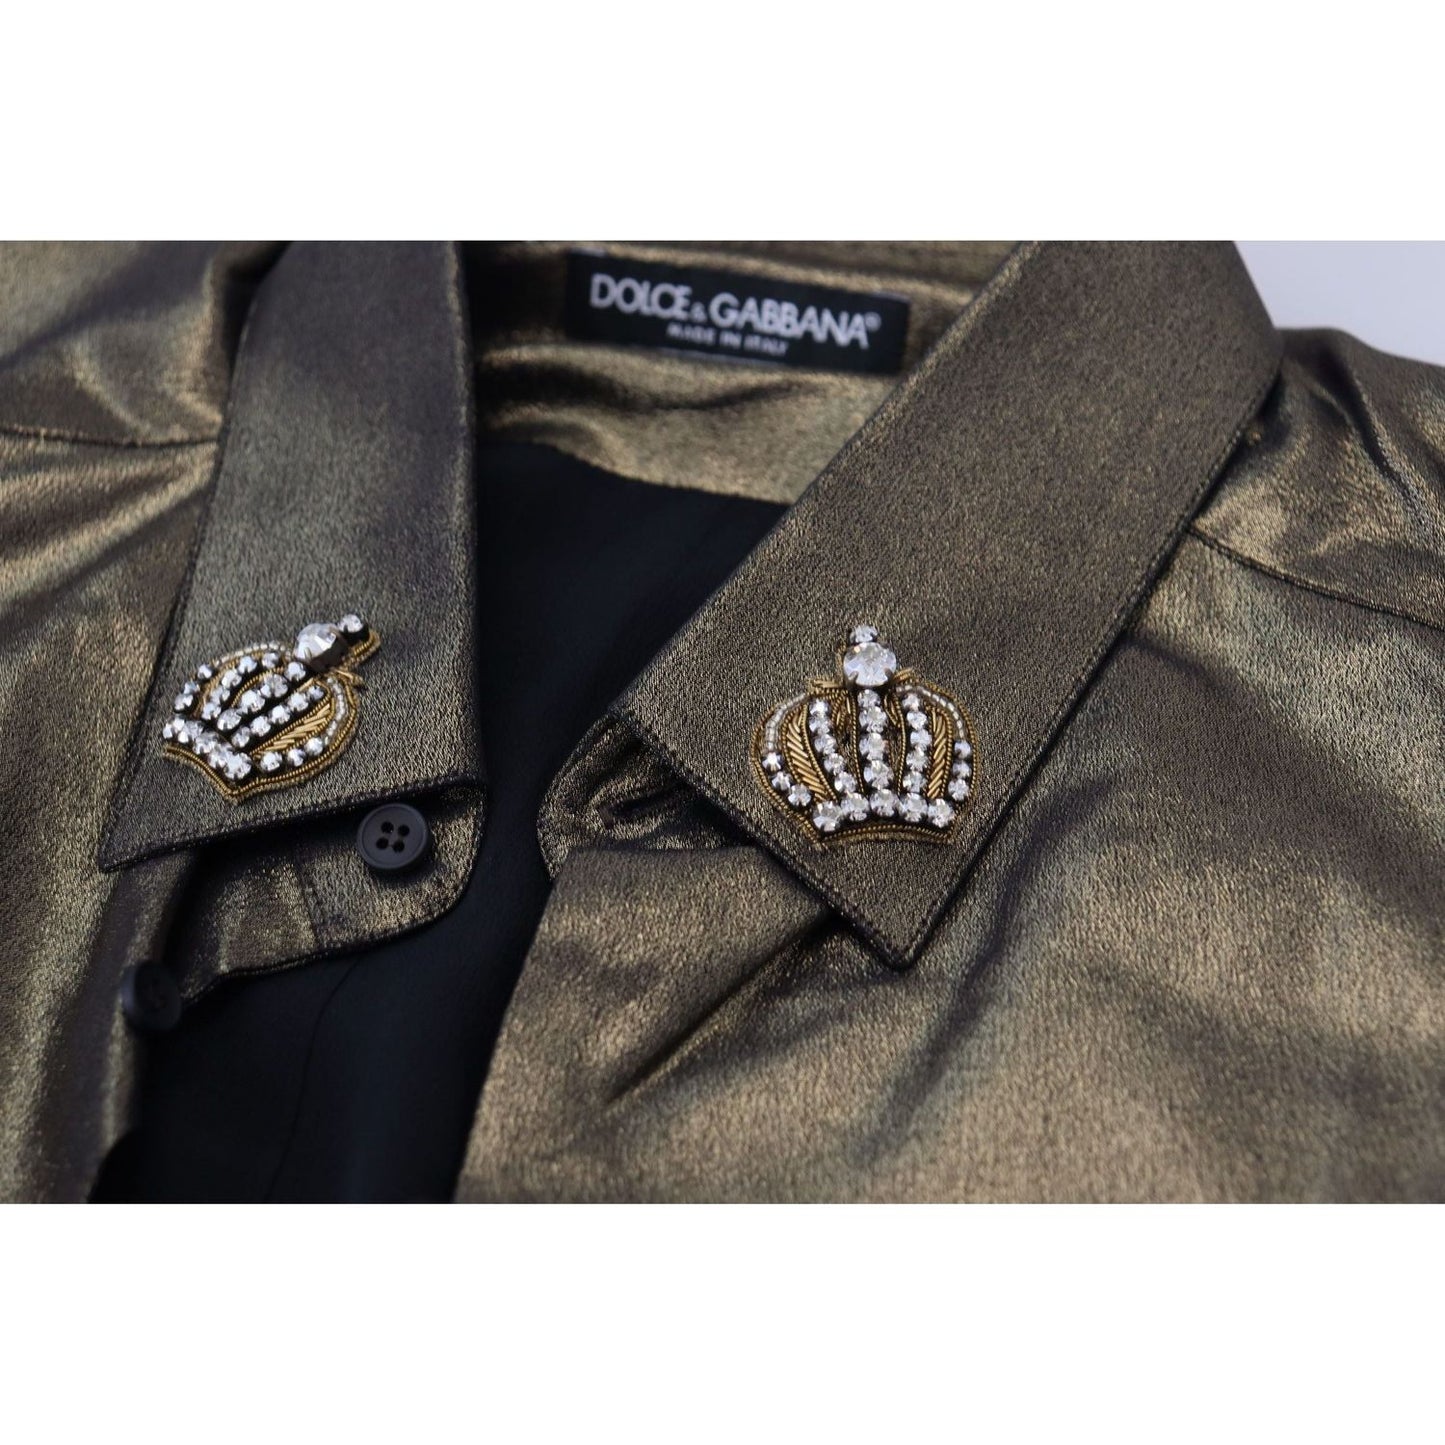 Dolce & Gabbana Elegant Gold Slim Fit Shirt with Crown Embroidery metallic-gold-dg-embroidered-crown-silk-shirt IMG_7242-scaled-c8ed06b9-674.jpg